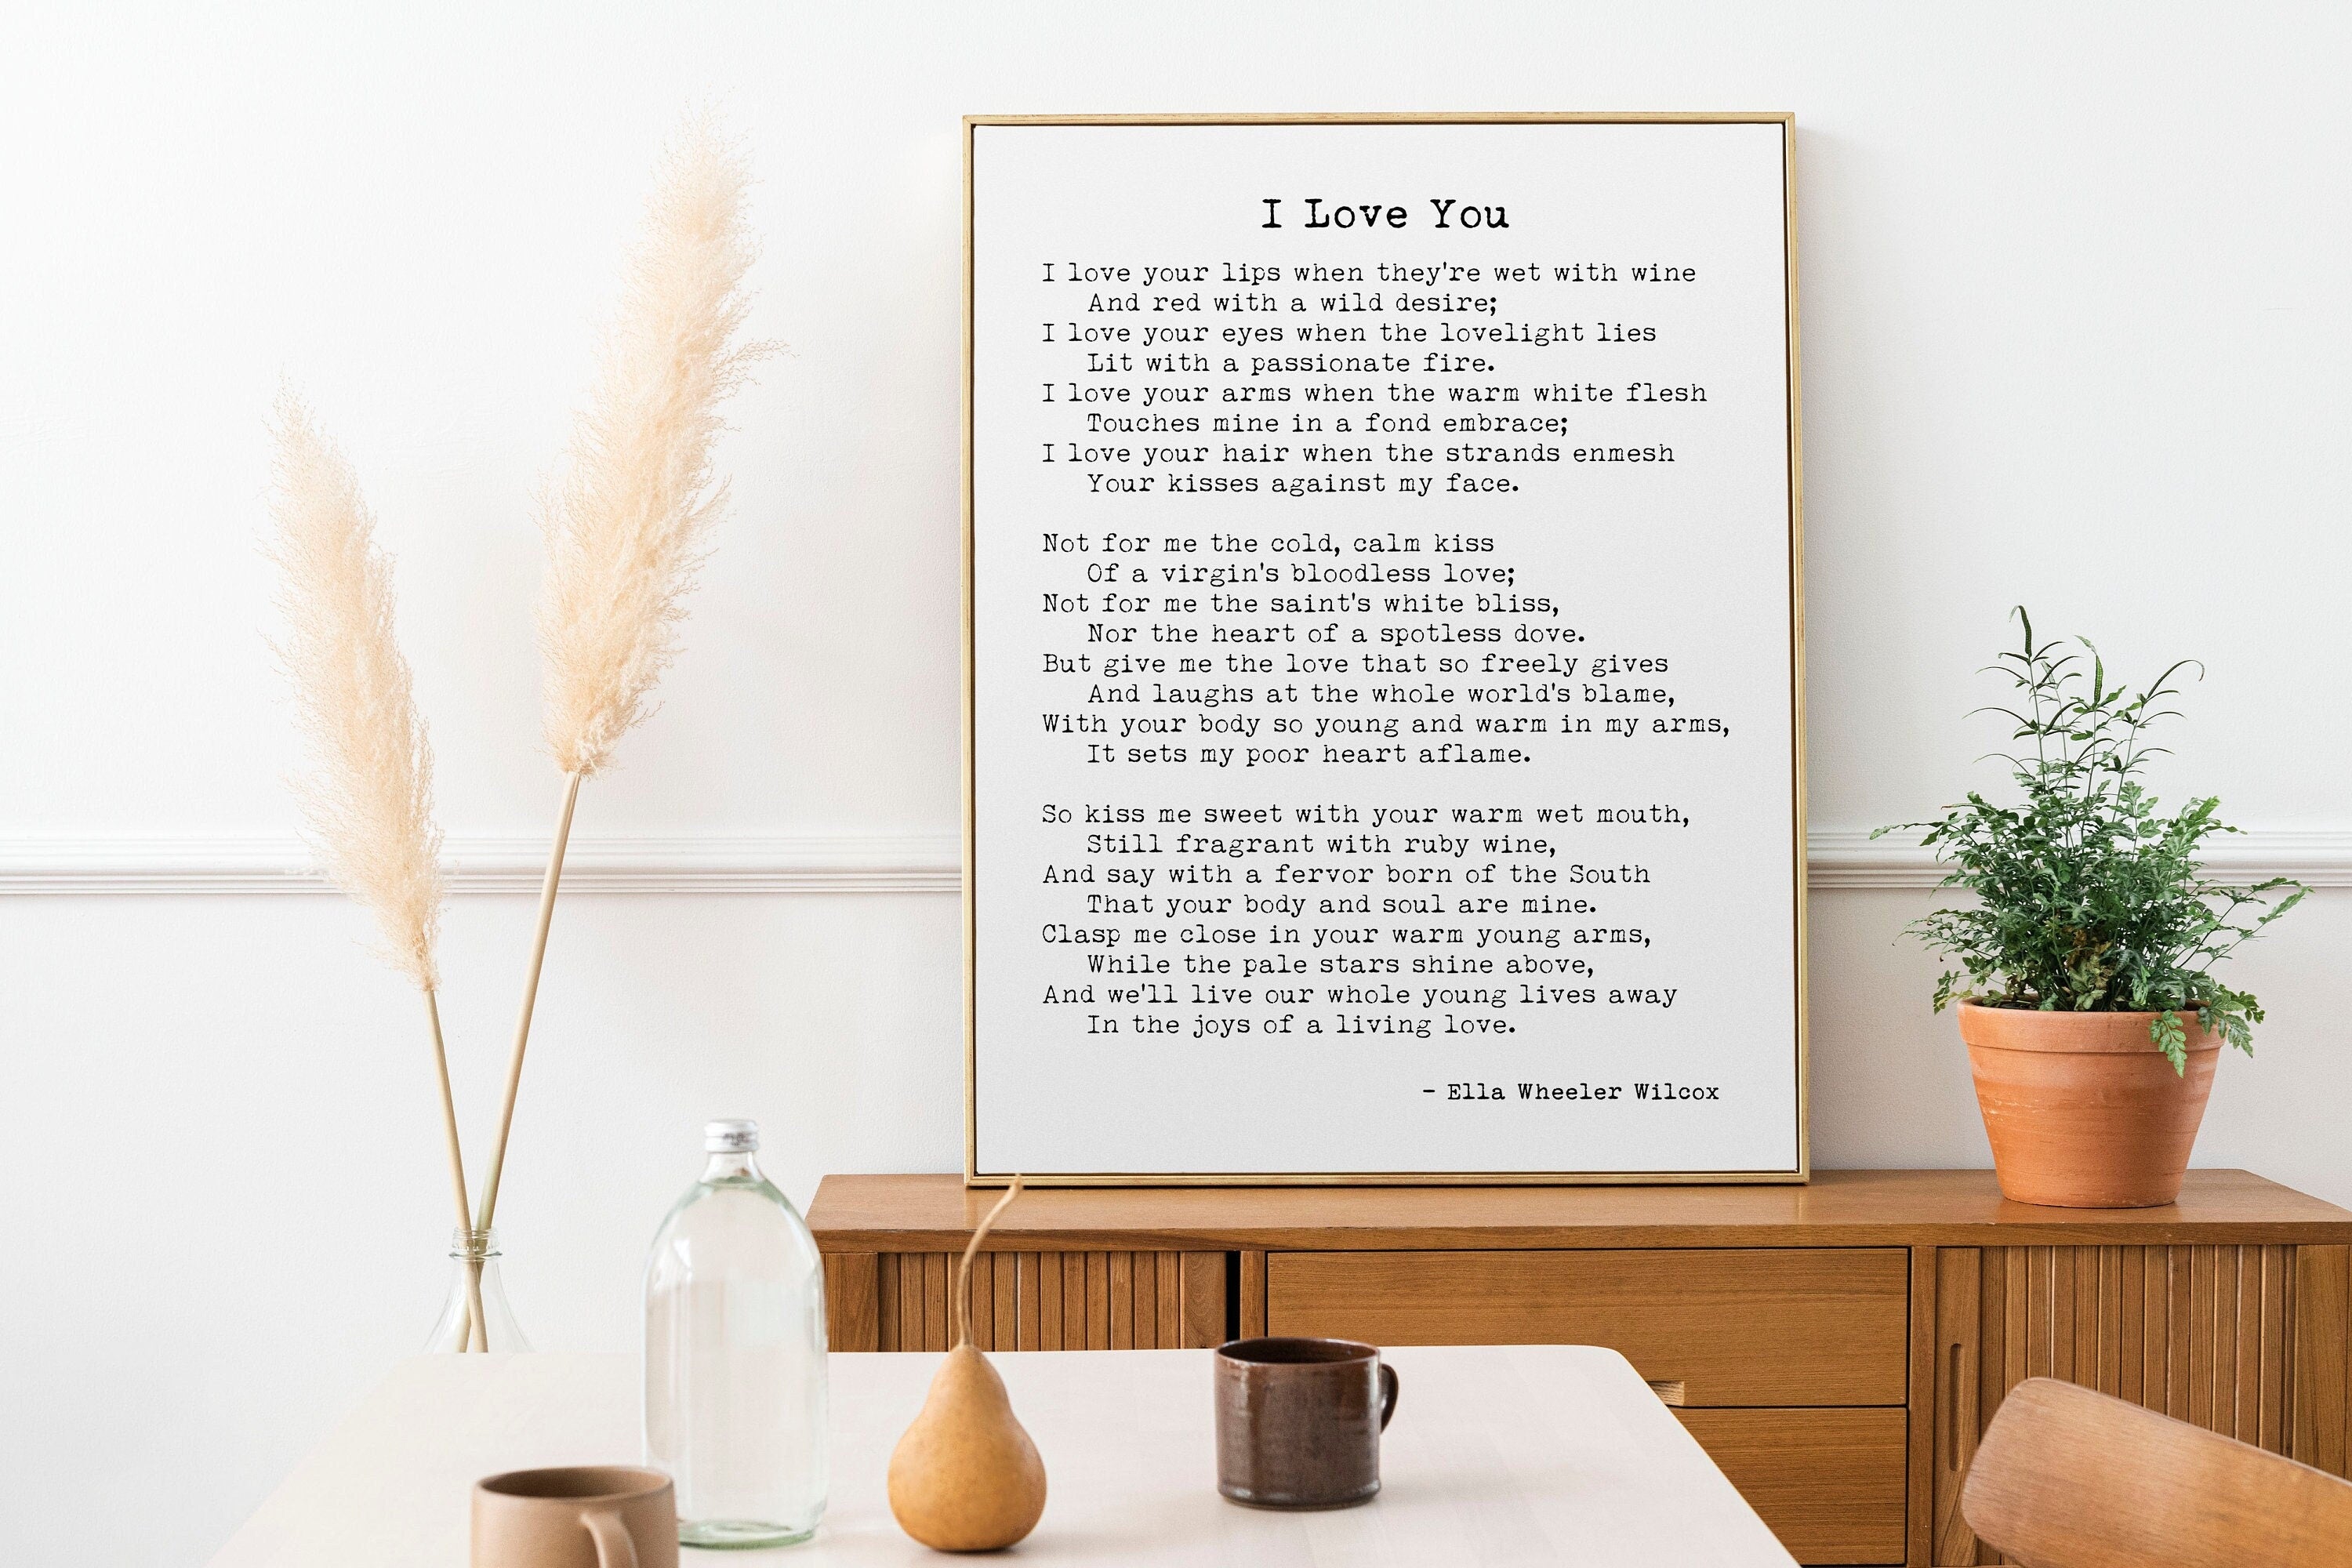 Ella Wheeler Wilcox Poem I Love Your Lips When They’re Wet With Wine Wall Art Print, Literary Gift Poetry Print